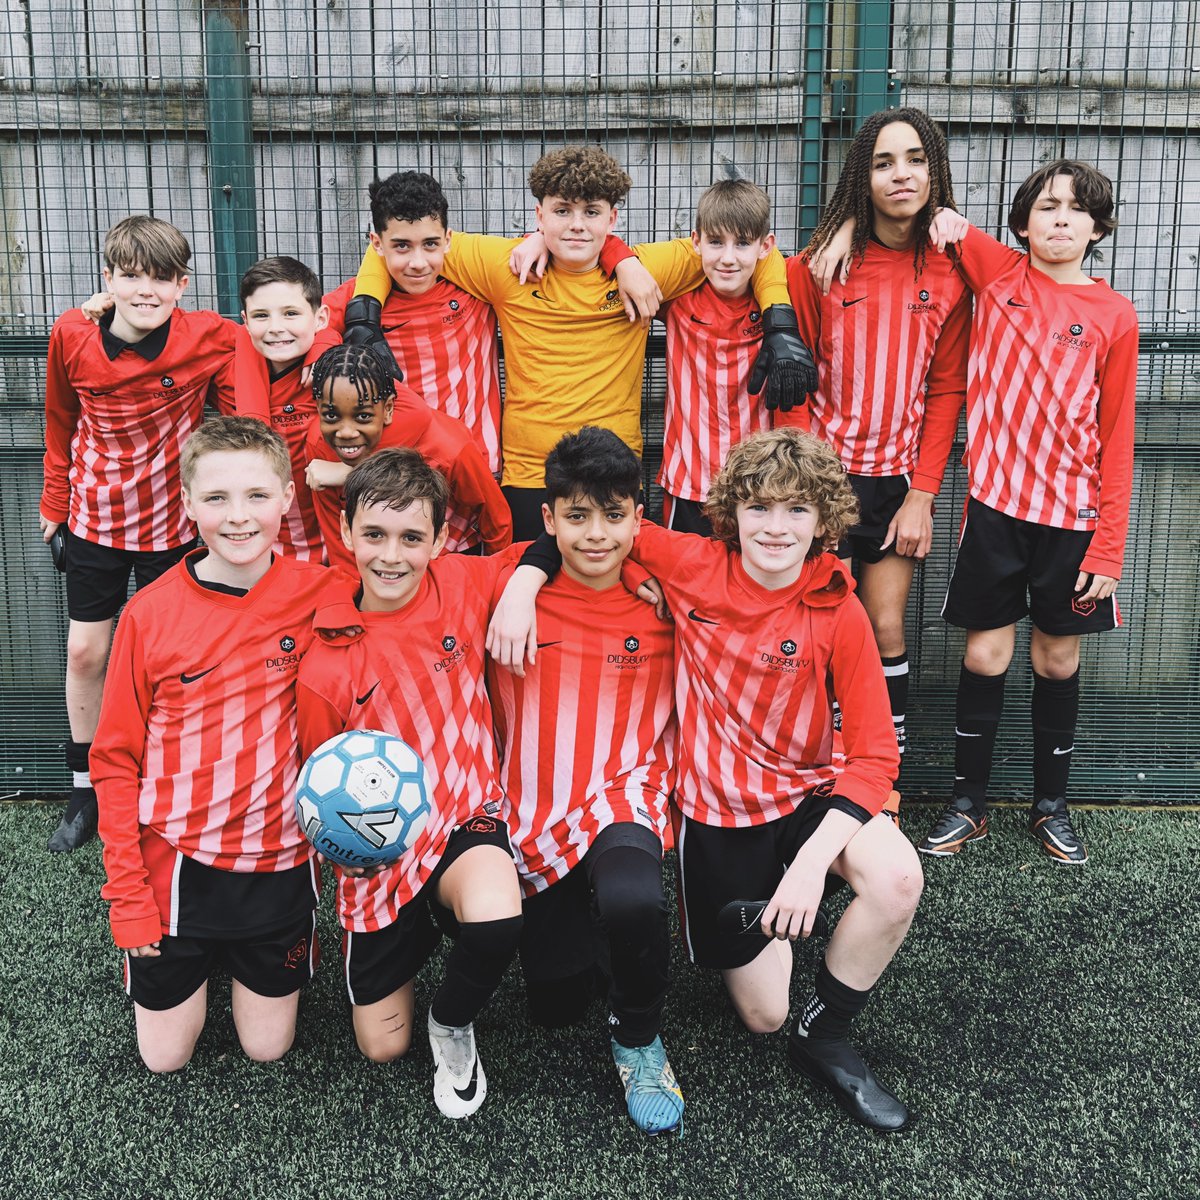 ⚽️ | Football Finalists Our Year 7 Boys Football team are through to the Manchester League final after a 6-1 win yesterday! It was an incredible team effort, with the boys battling for each goal up to the final whistle. A huge well done boys, best of luck in next week's final!